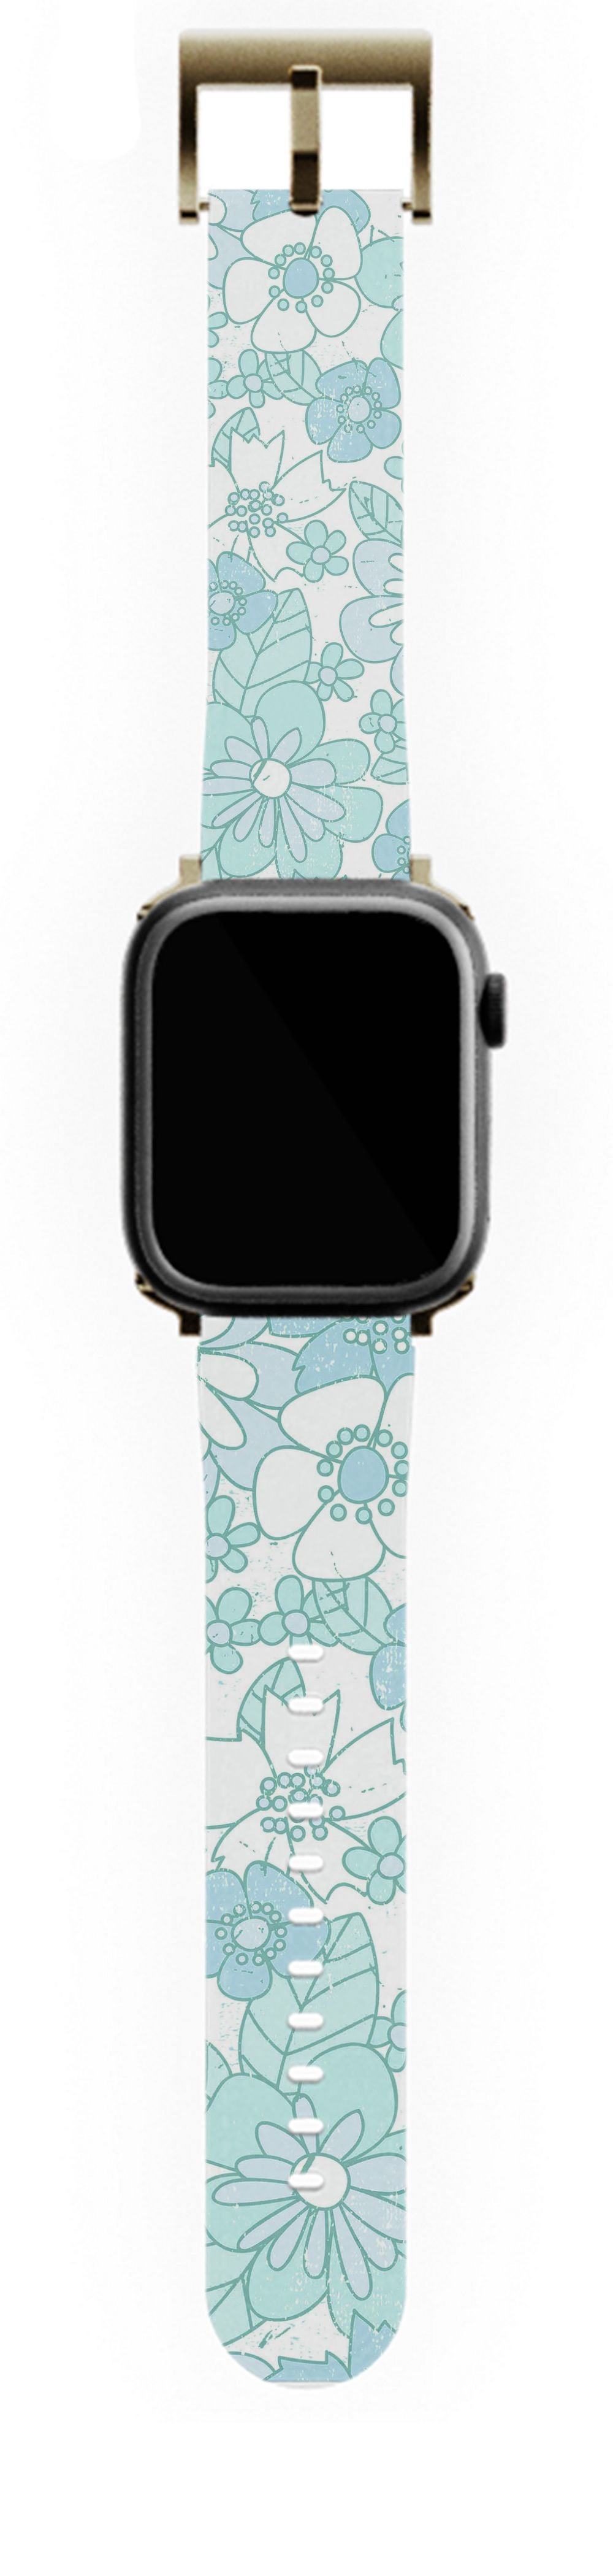 Baby Blue Retro Floral Apple Watch Band - daziecases